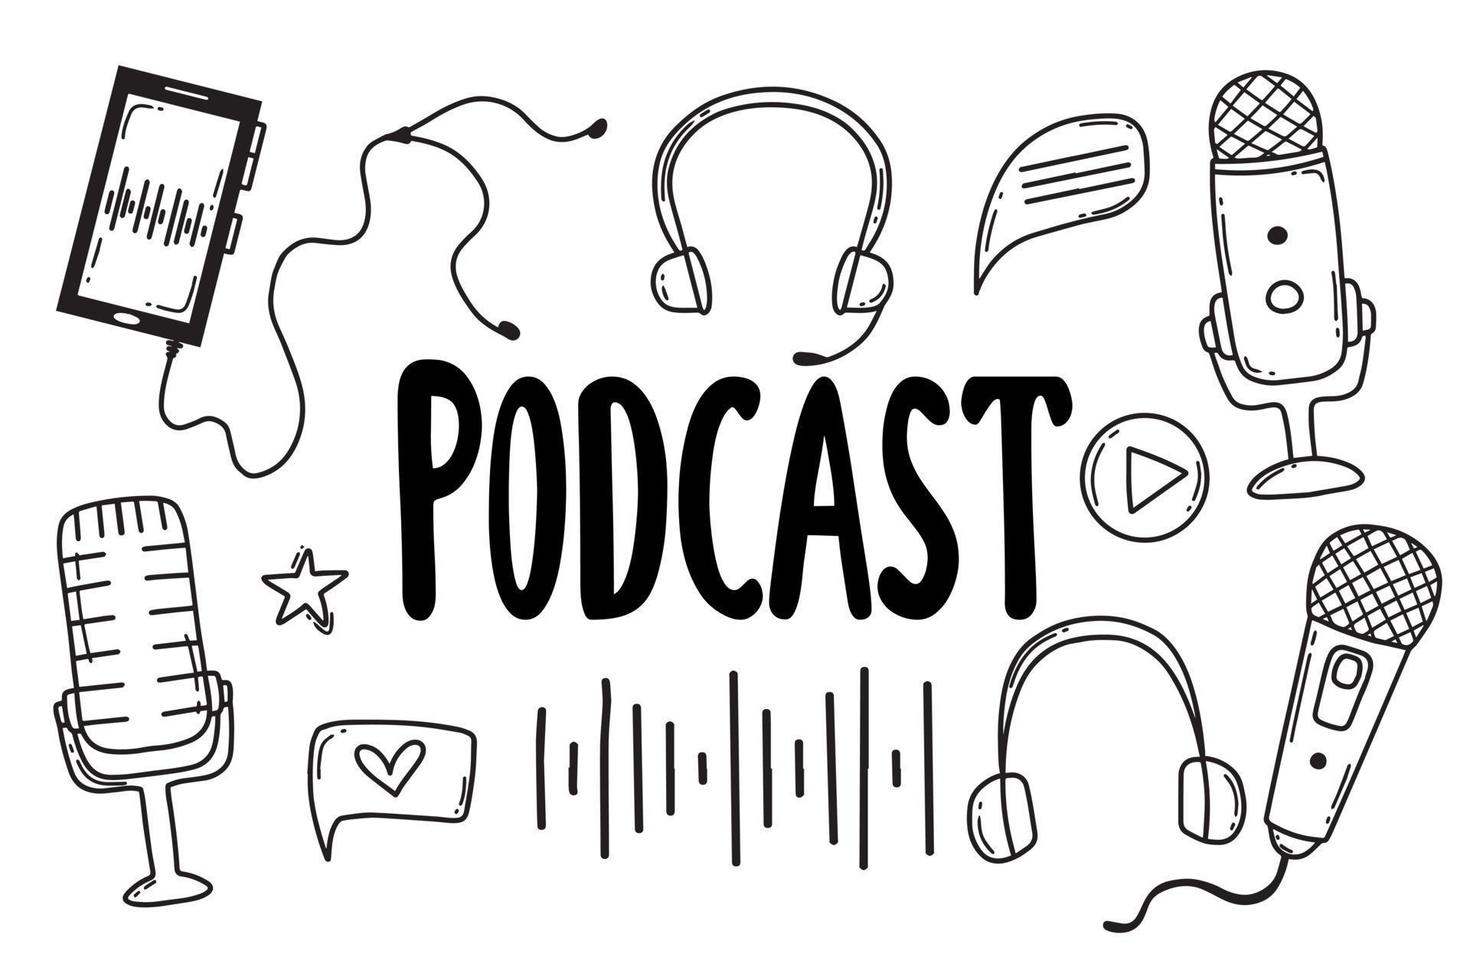 Podcast set. Vector illustration. Doodle style. Collection for broadcasting. Microphones and headphones.